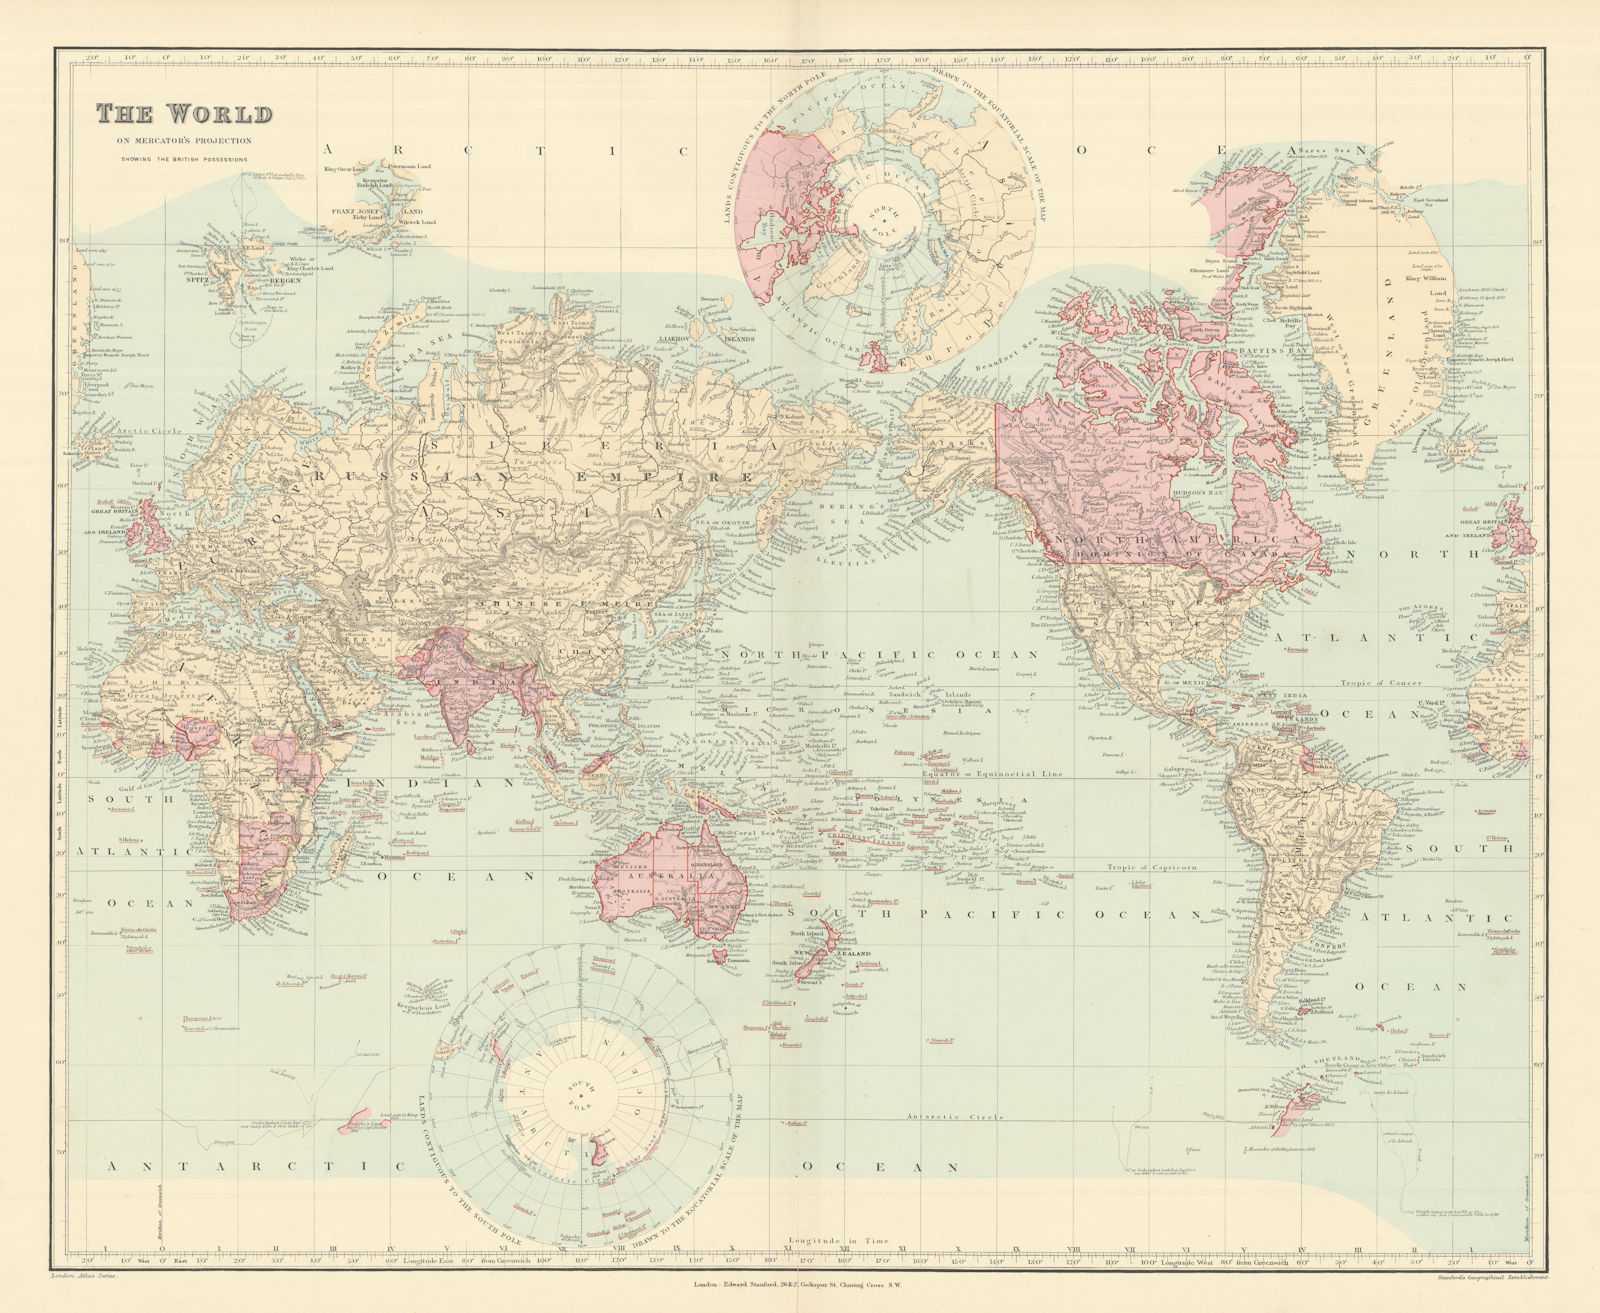 Associate Product The World showing British Possessions/Empire in pink. 52x63cm. STANFORD 1894 map